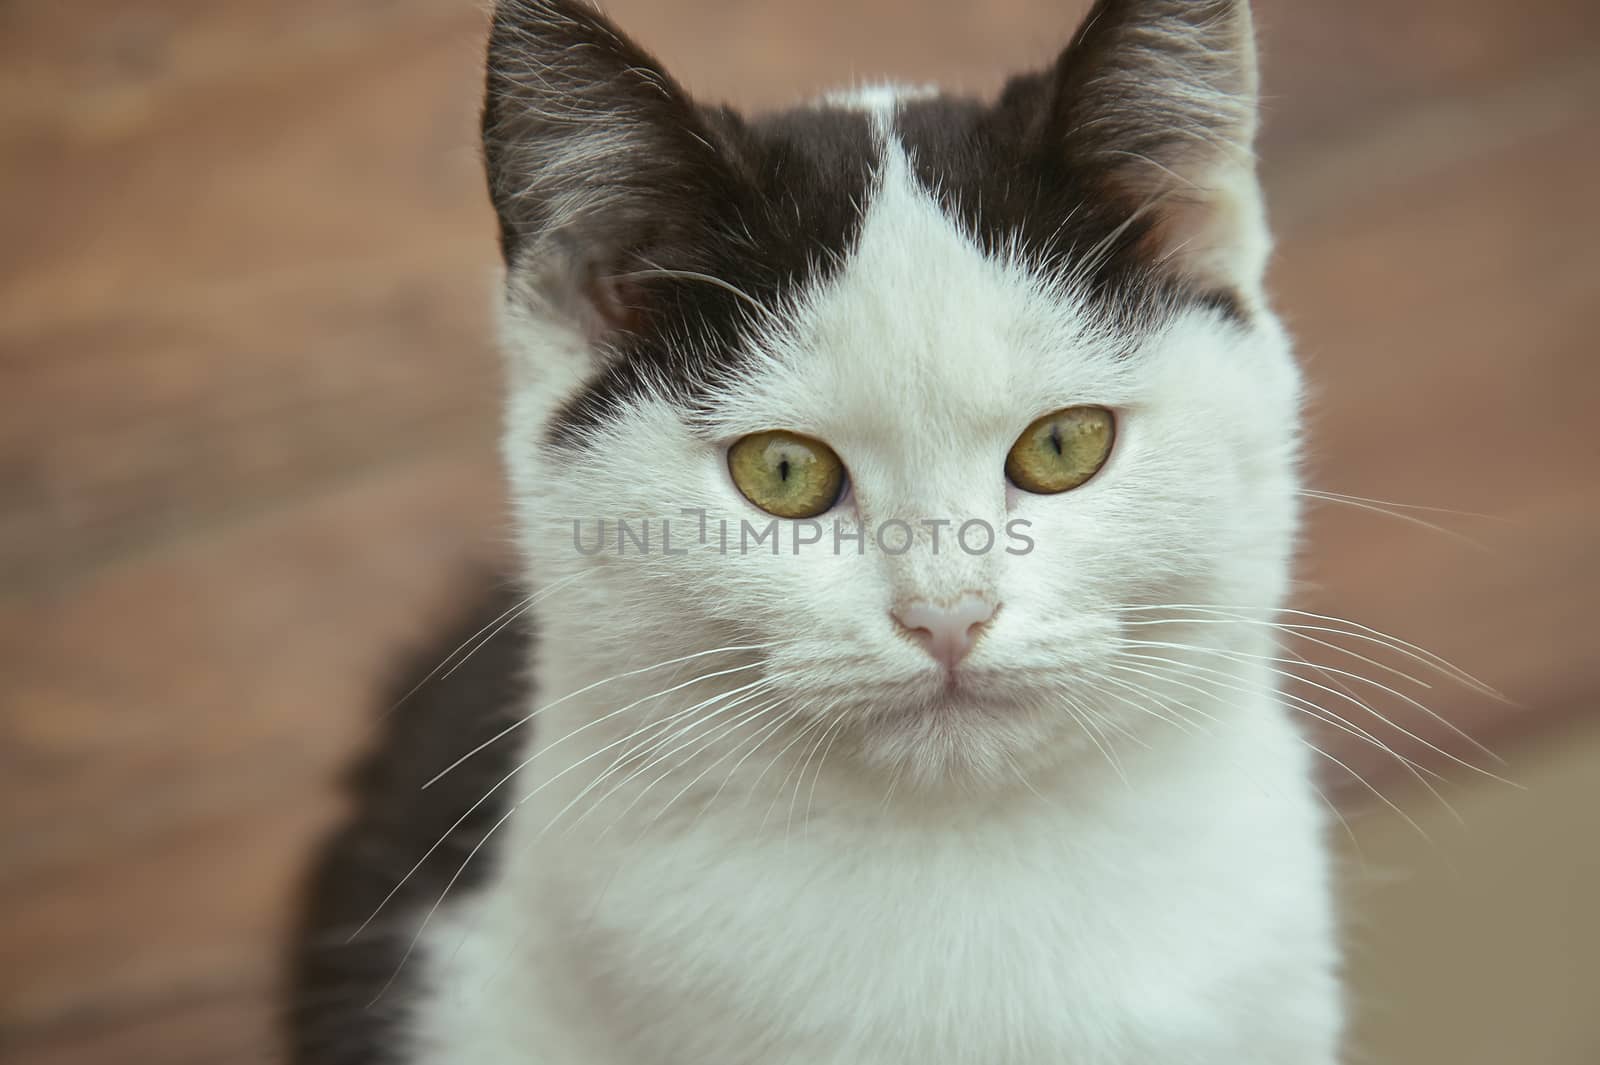 Closeup of a white kitten with black spots with blurry background. Photos at the highest level of detail!